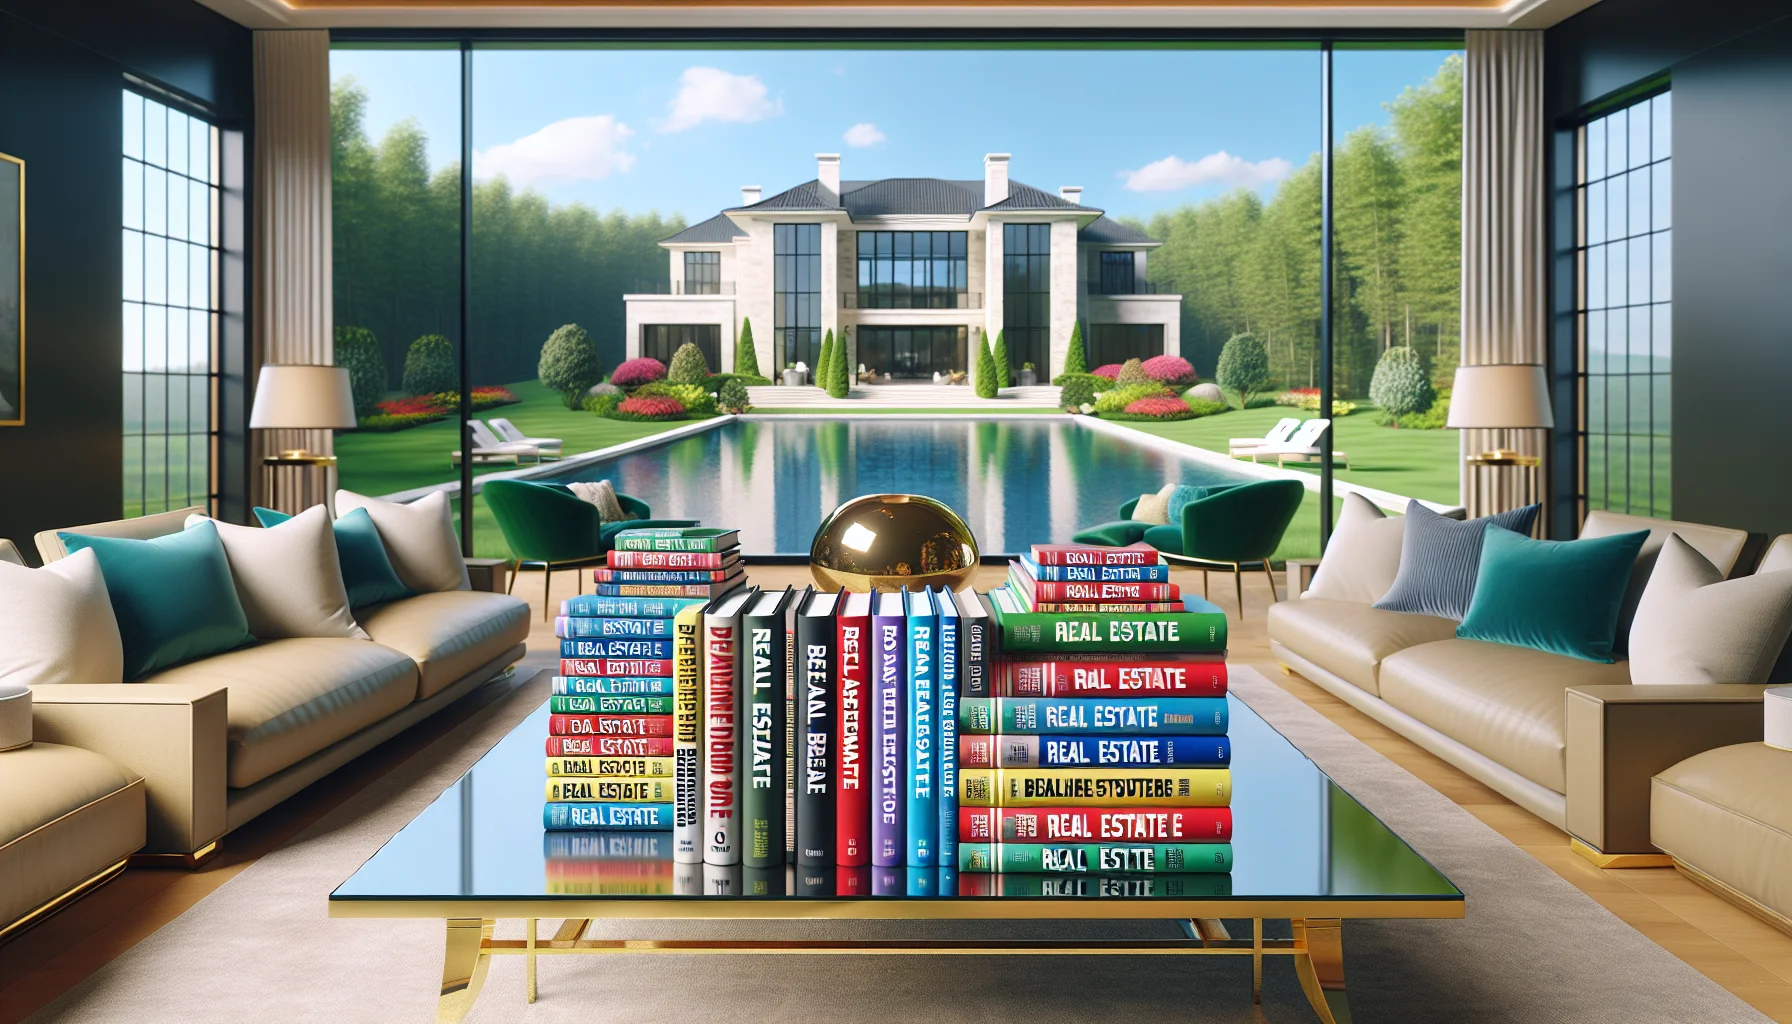 Create a humor-filled, realistic setting that showcases an array of beginner-level real estate books. Nestle these books in a delightful backdrop that portrays the epitome of real estate success. This could be a high-end, modern home interior, brimming with clean lines, plush furniture, expensive artwork, and vast floor-to-ceiling windows revealing a picturesque outside view. Perhaps a luscious green, perfectly manicured lawn and sprawling estate seen in the backdrop, embodying everyone's dream property. In the foreground, a polished glass coffee table presents the bright, colorful covers of the real estate literature spreading a sense of aspiration and excitement for beginners wanting to break into the real estate industry.